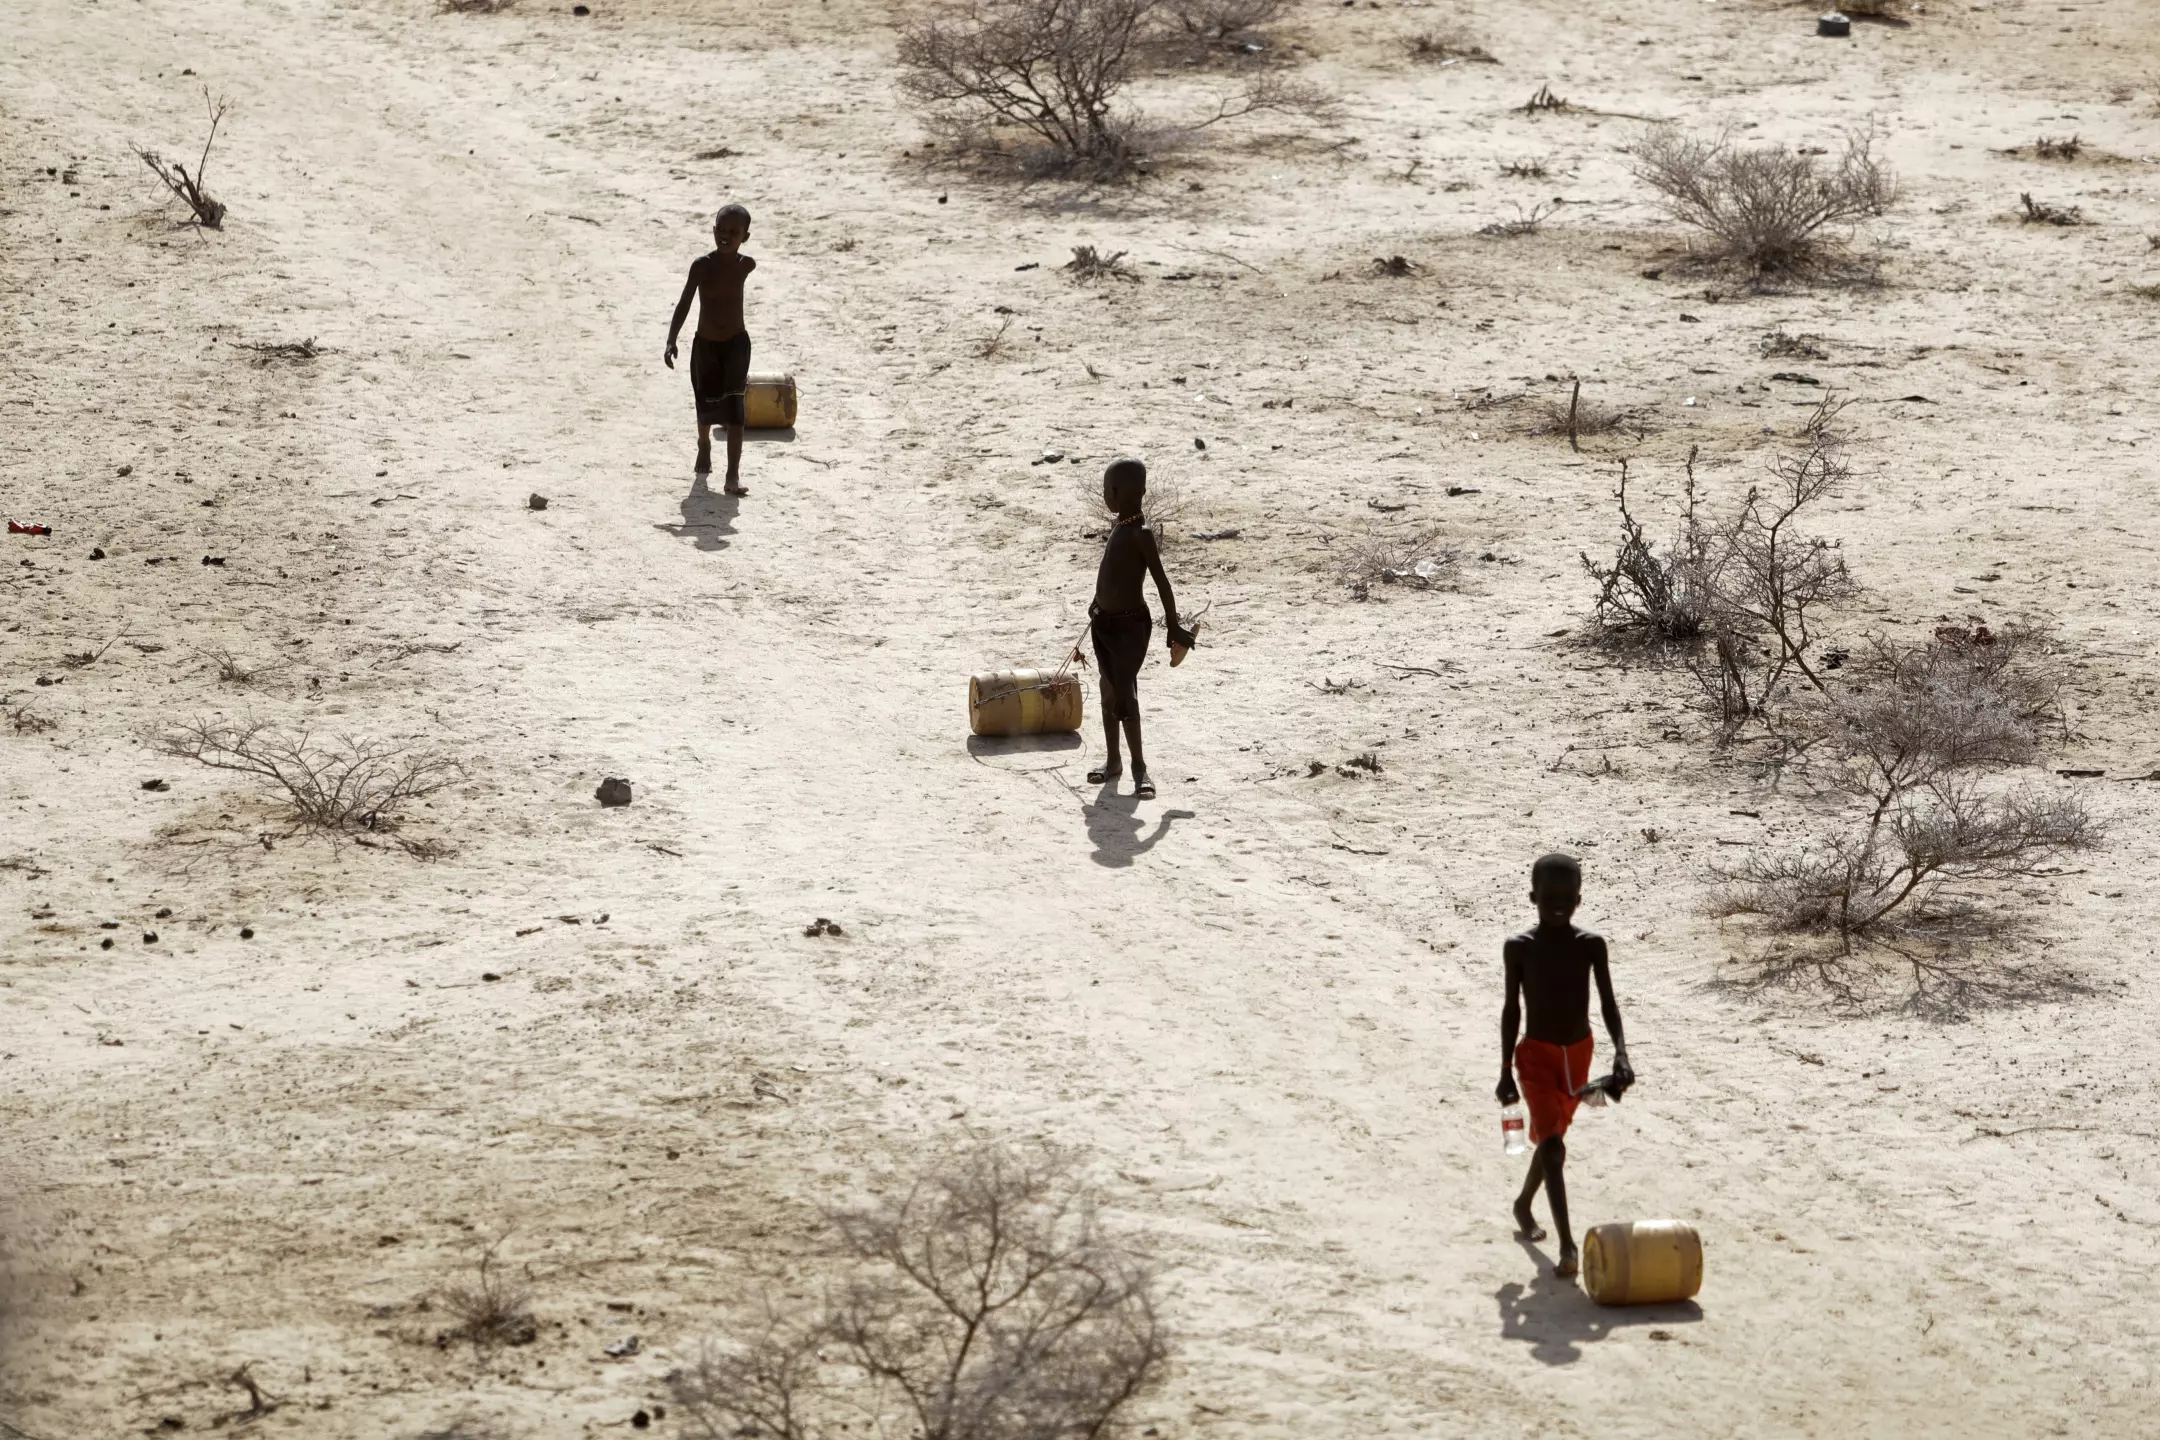 Boys pull containers filled with water as they return from a well in the village of Ntabasi, Kenya, amid drought in 2022. Photo: Brian Inganga / Associated Press